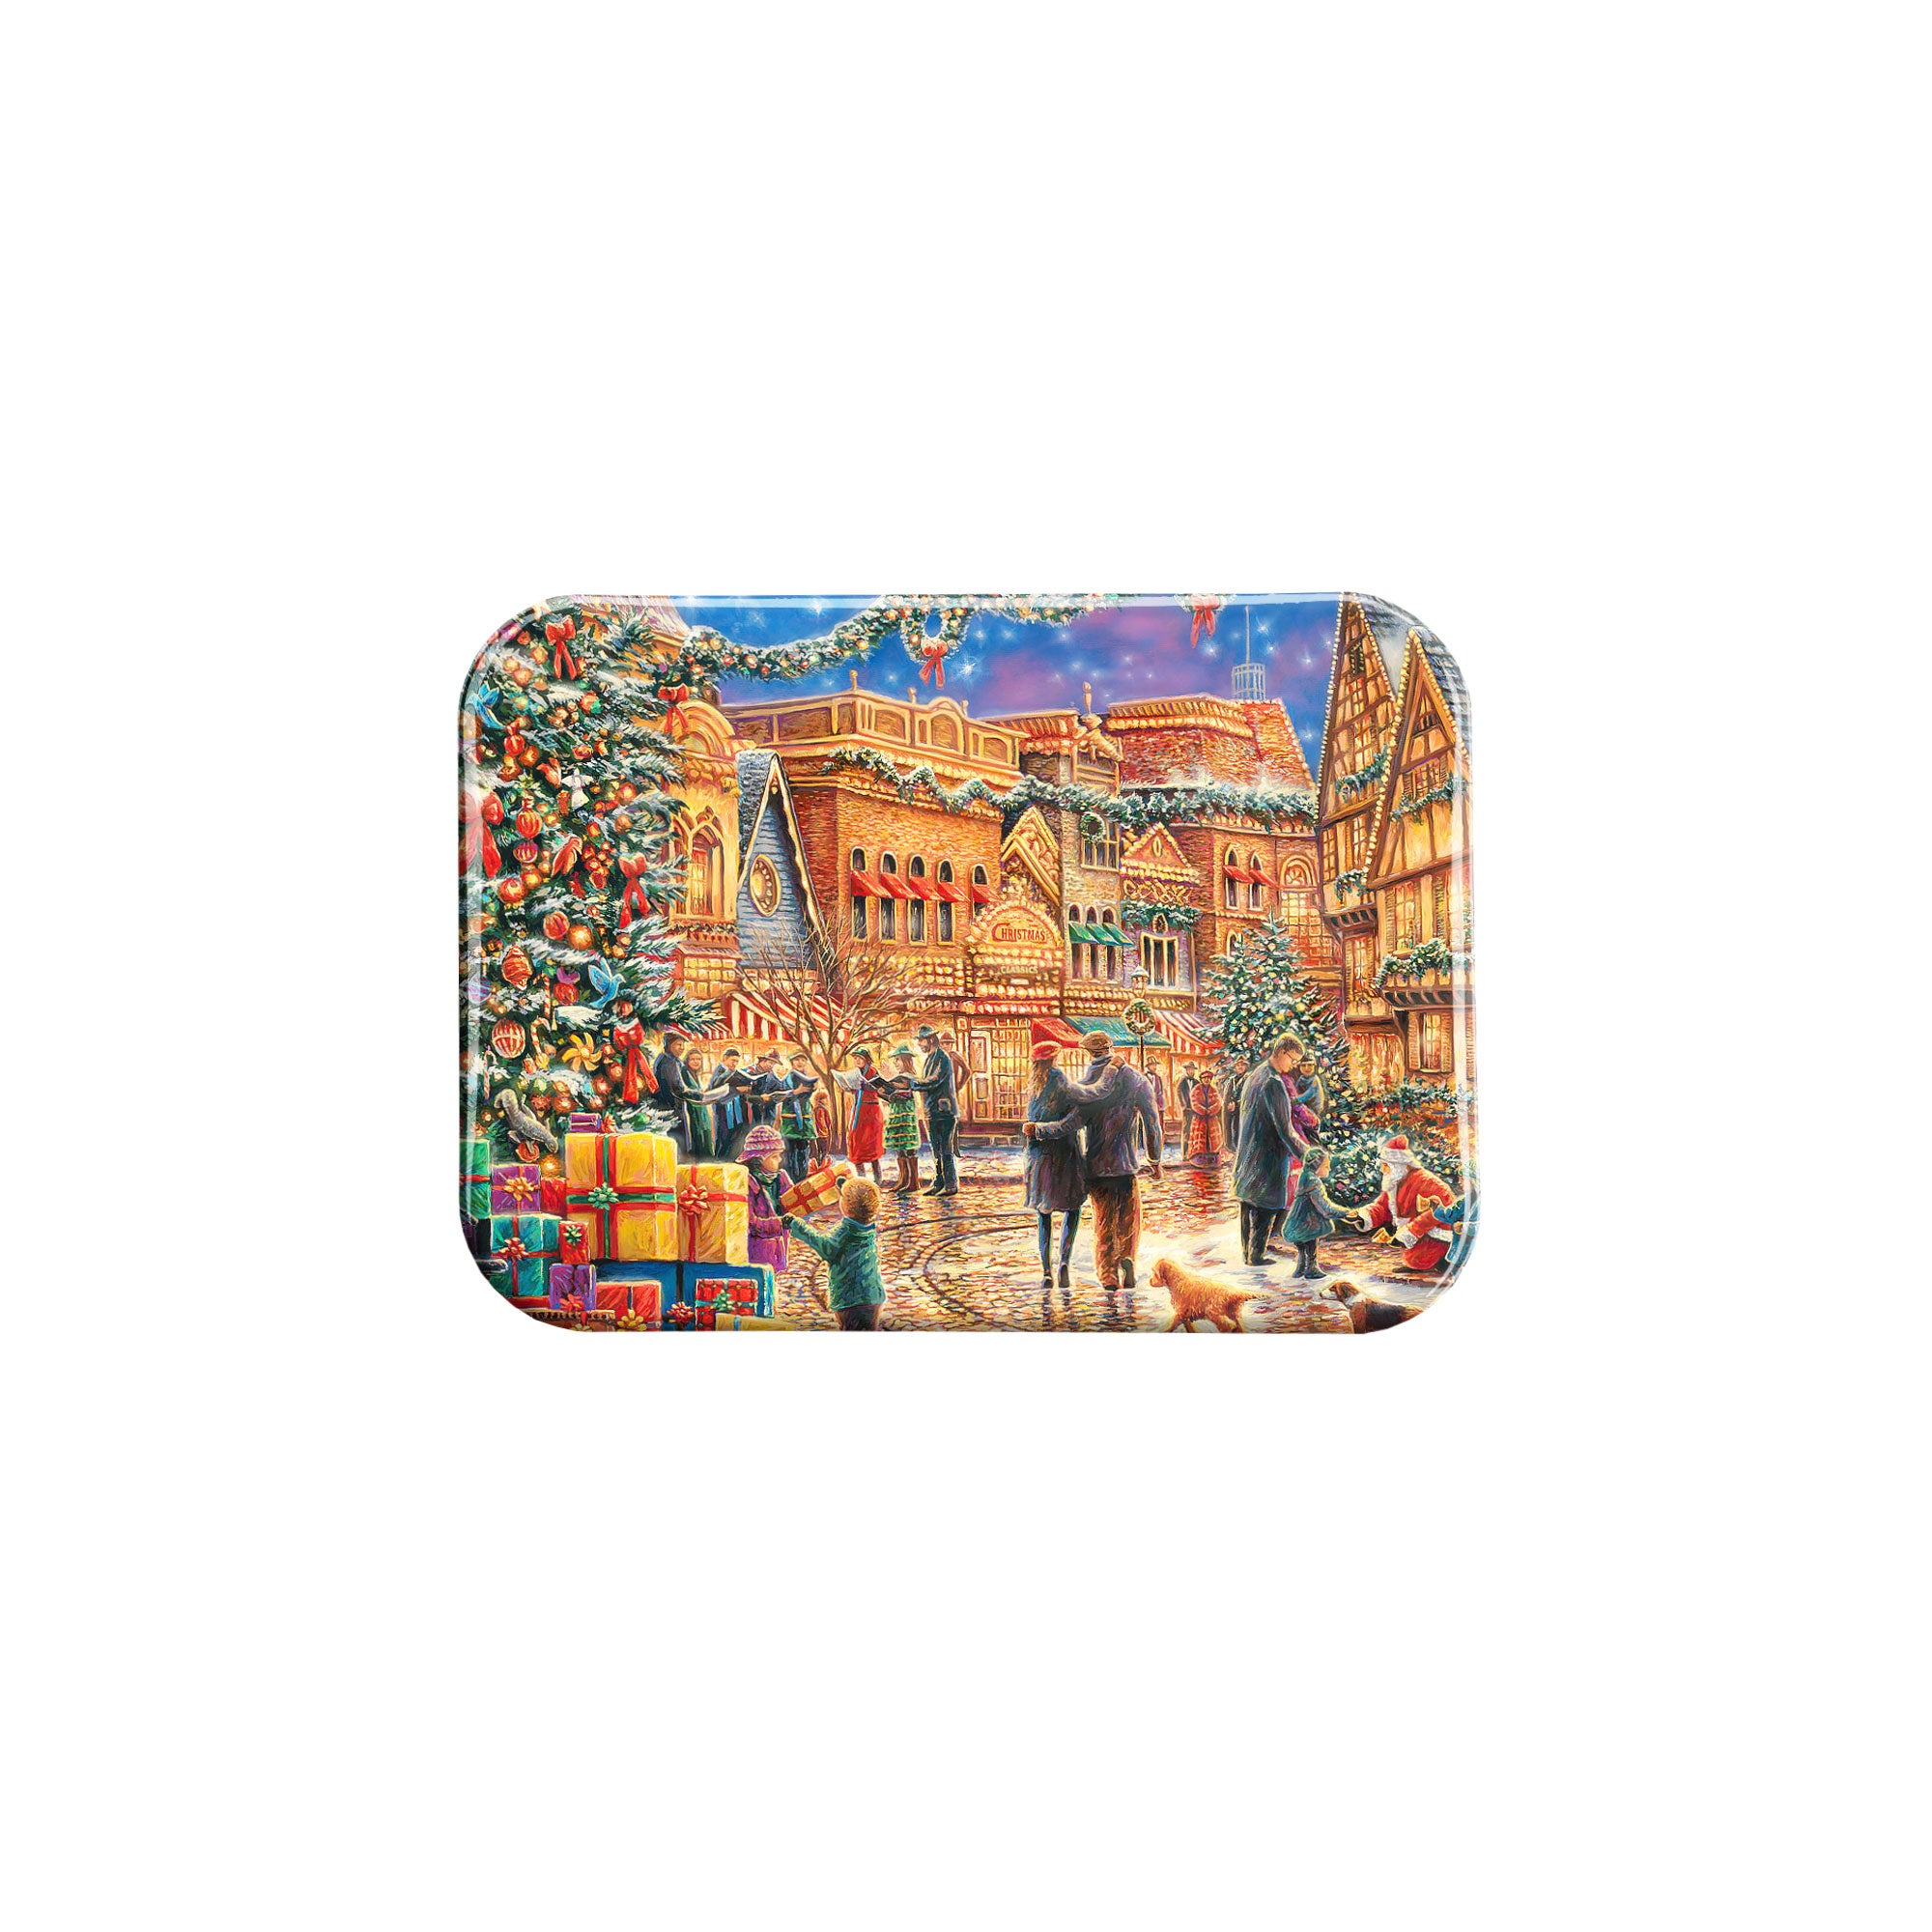 "Christmas At Town Square" - 2.5" X 3.5" Rectangle Fridge Magnets